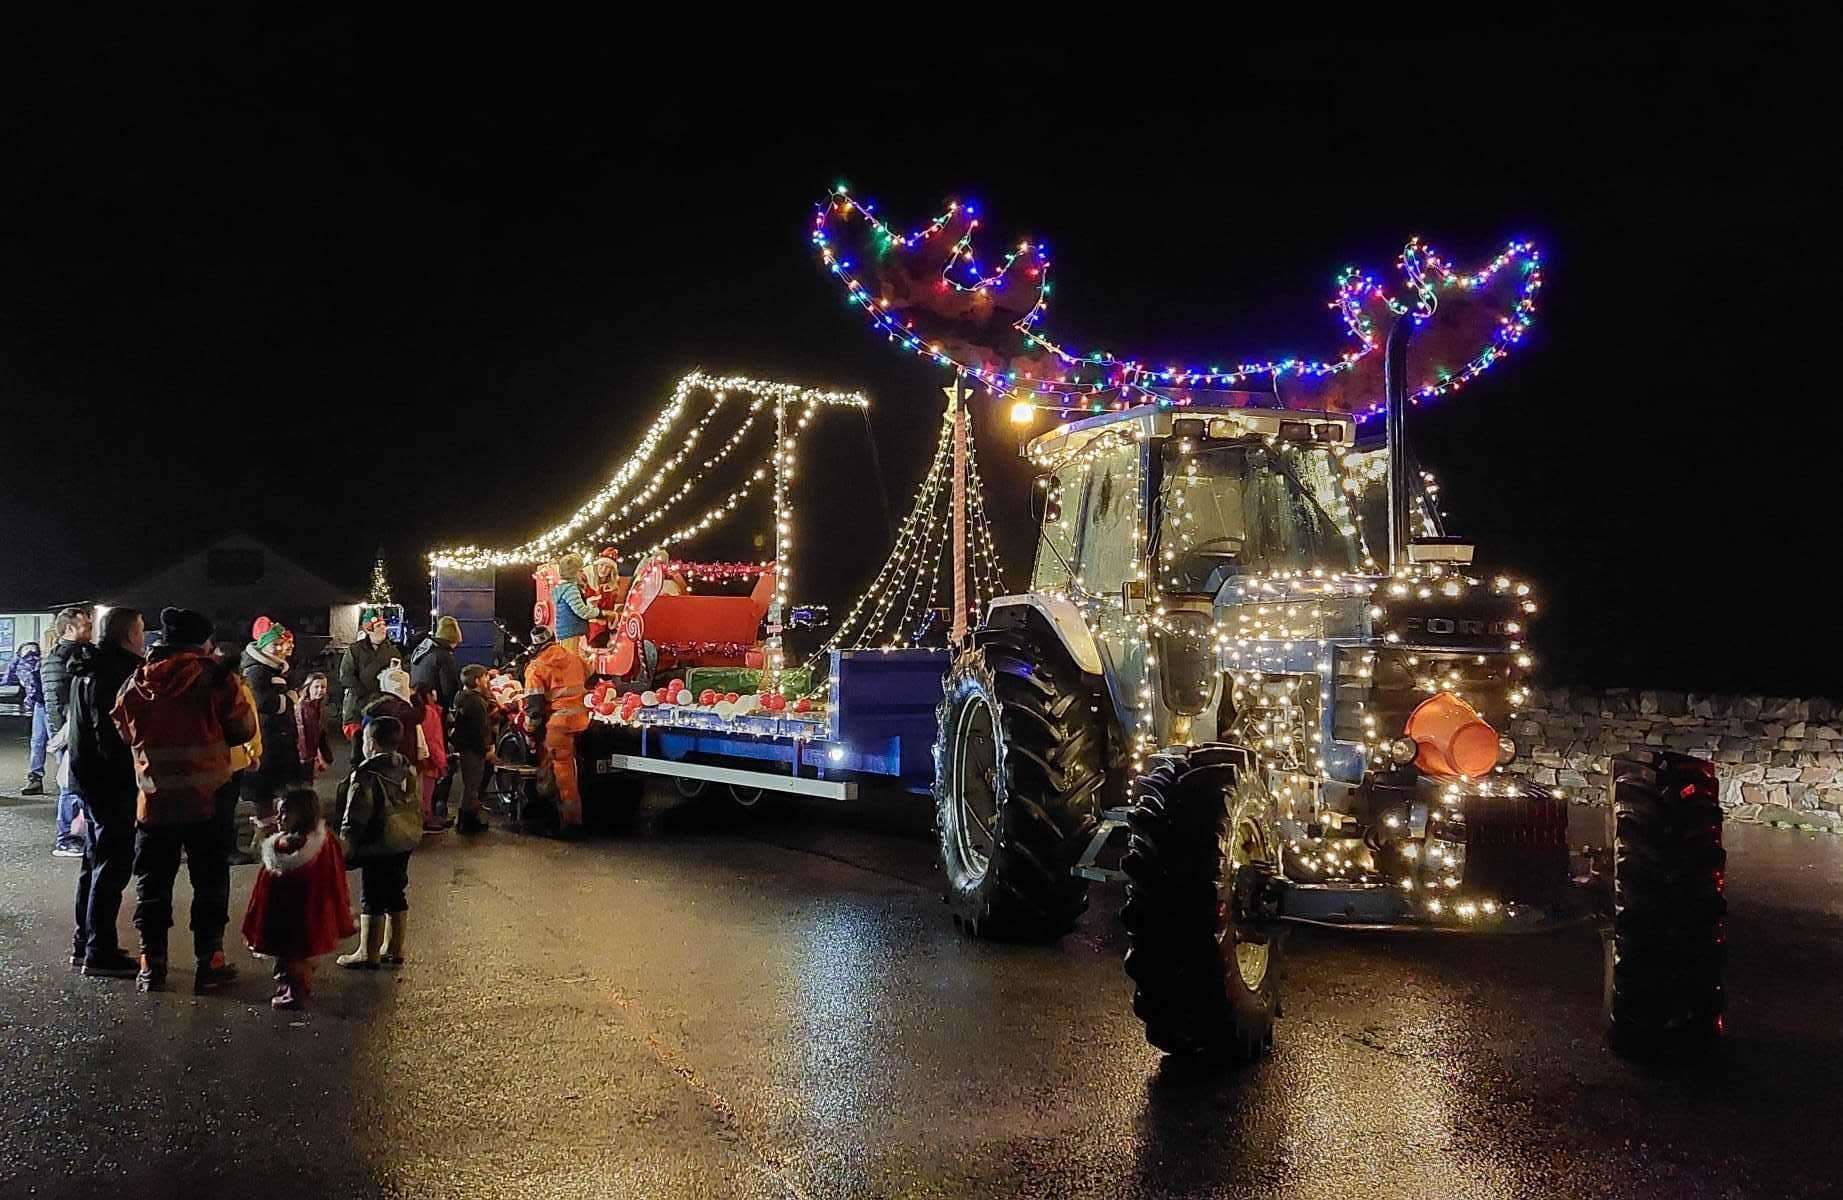 Santa and Mrs Claus were transported in a sleigh on the back of a trailer attached to a tractor decorated with huge reindeer horns. The event was a fundraiser for Scourie Primary School and Early Learning Centre.